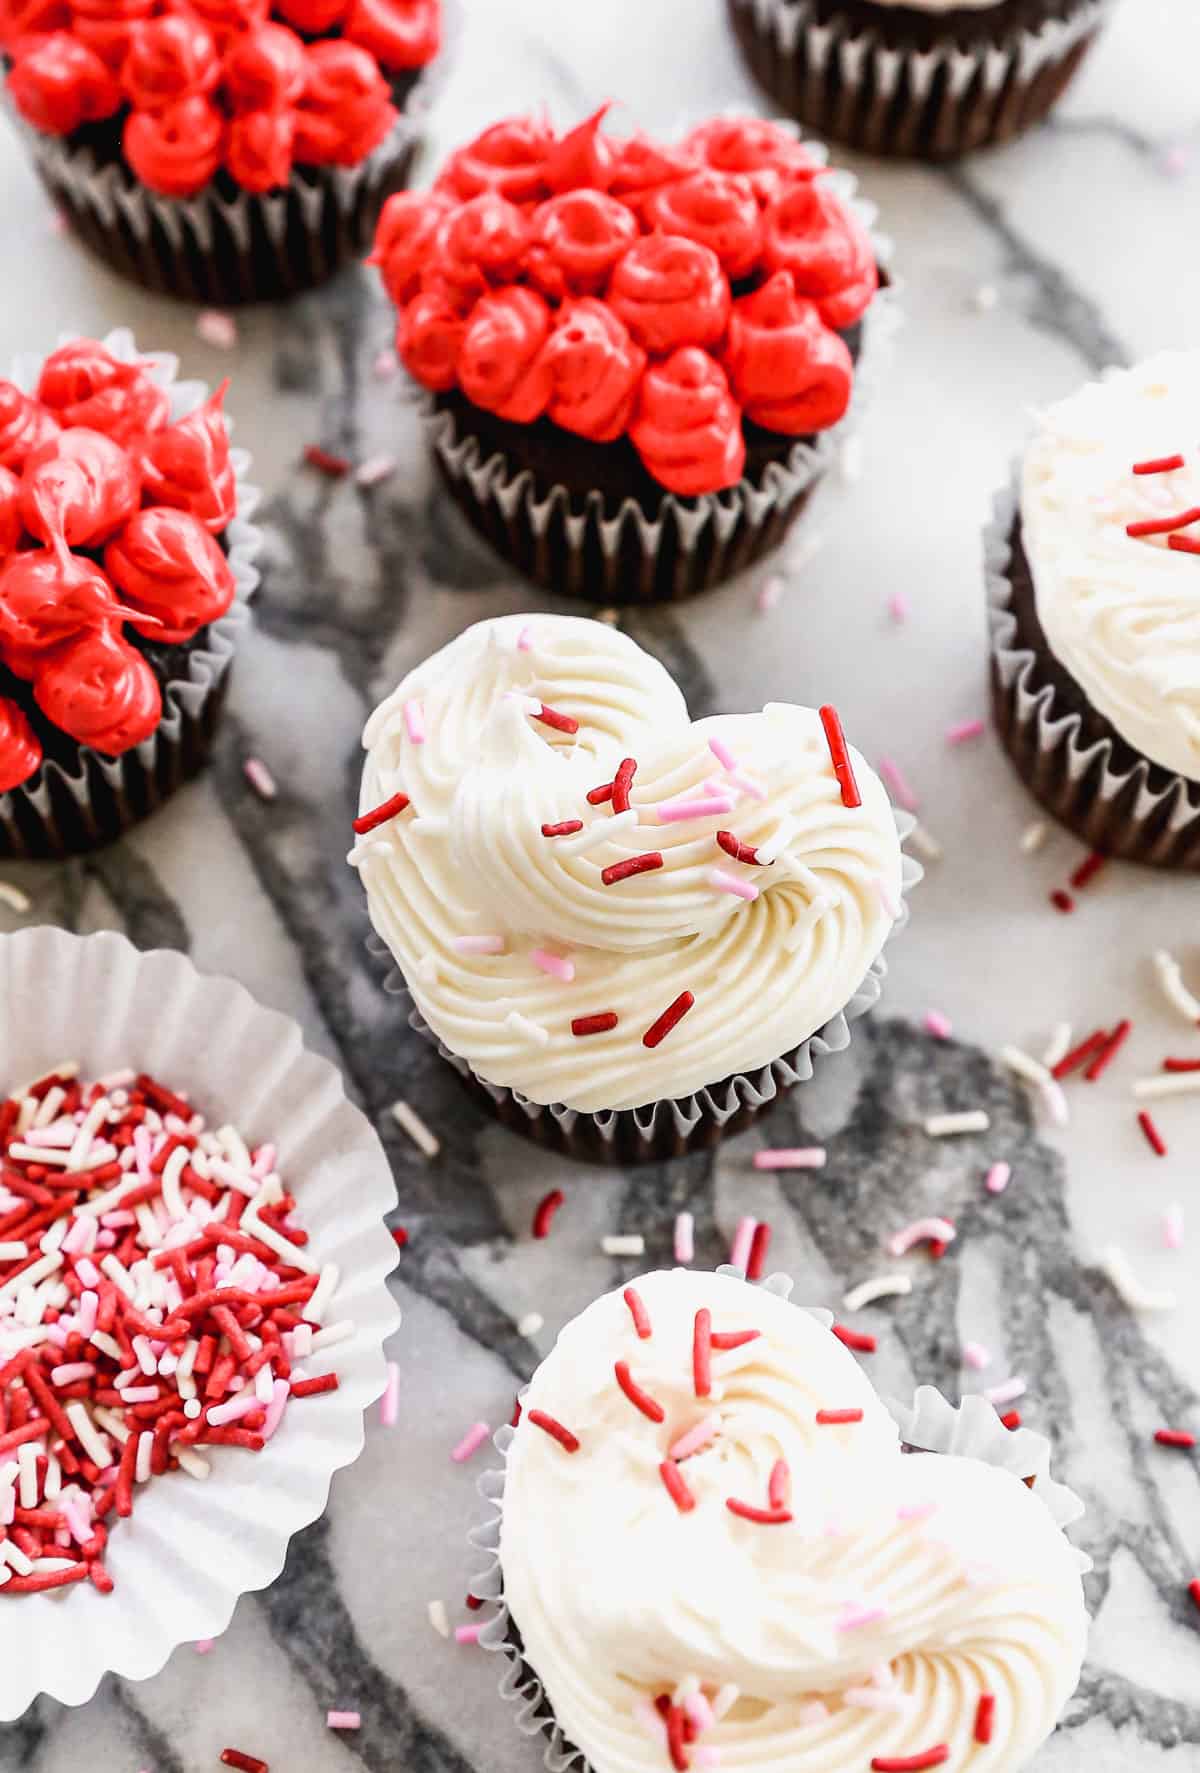 A white heart shaped cupcake with Valentine's sprinkles, surrounded by more red and white frosted heart cupcakes.